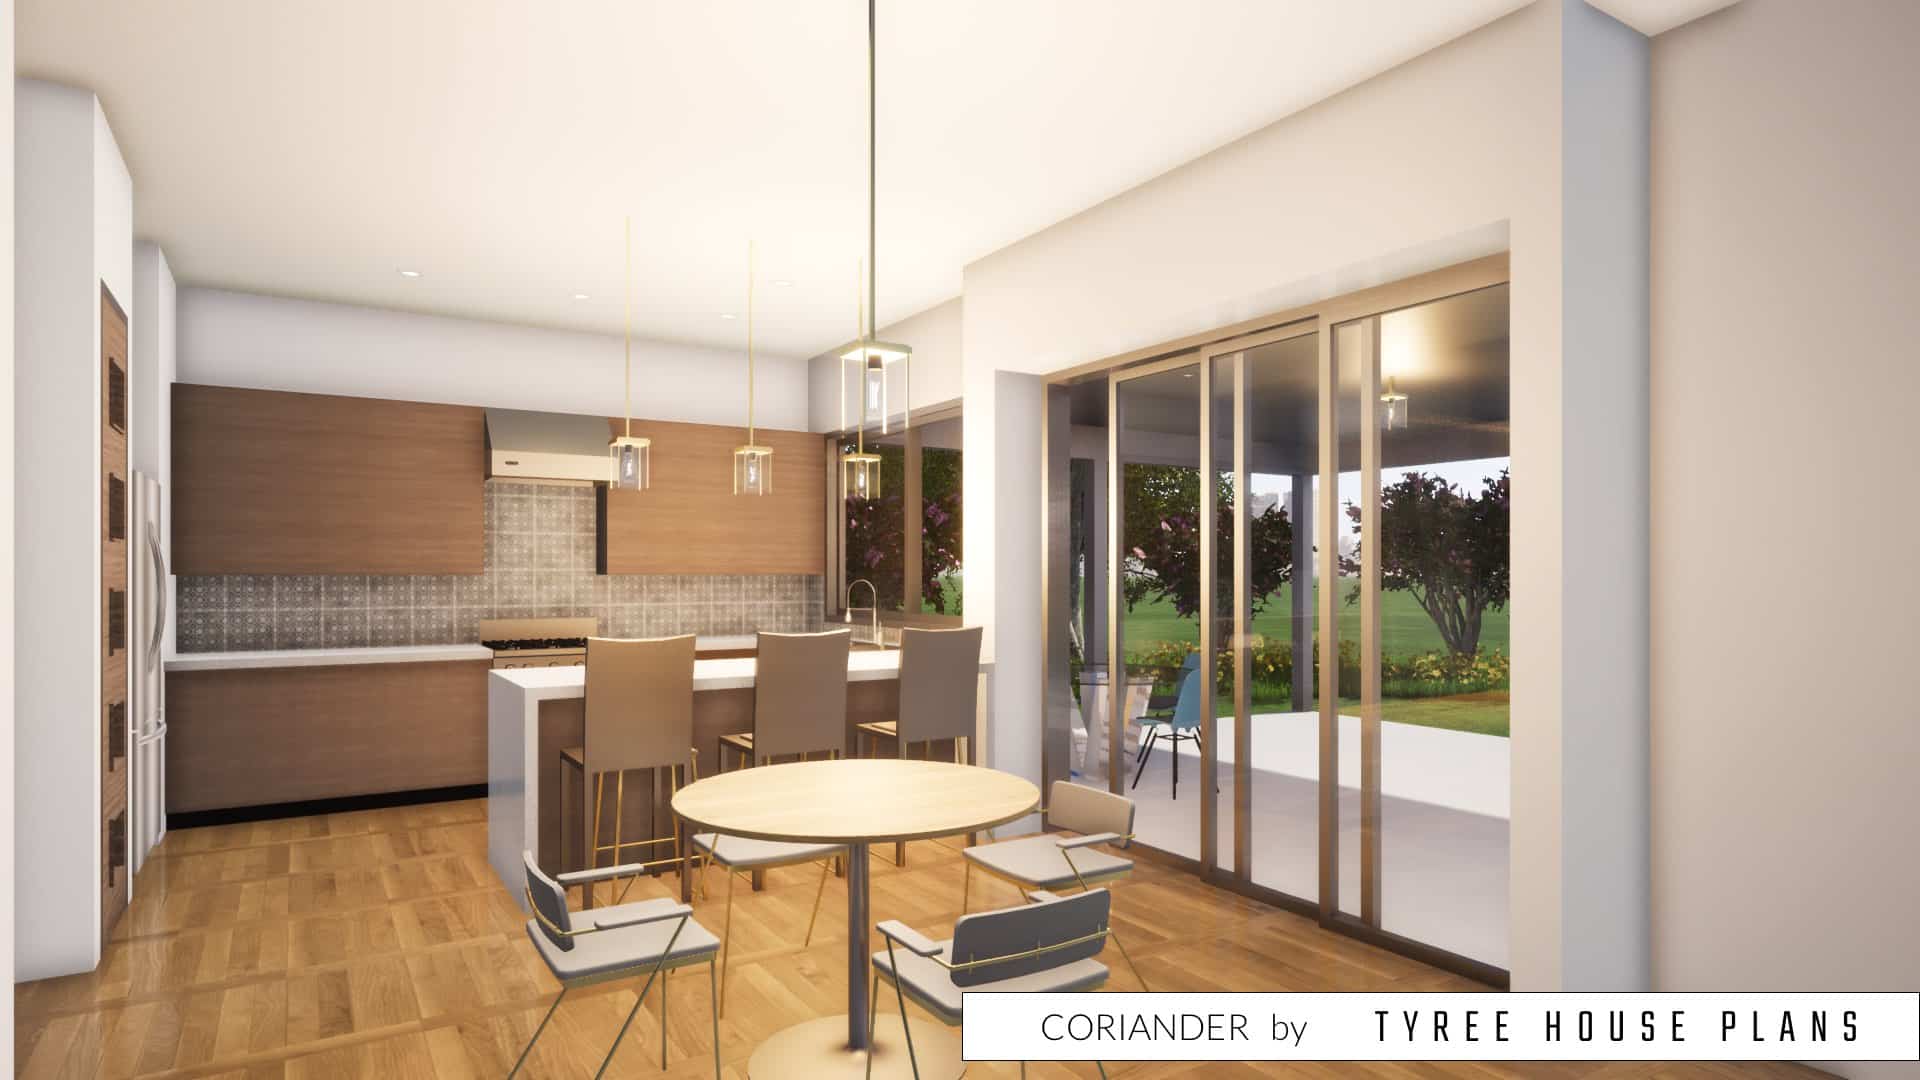 Kitchen. Coriander by Tyree House Plans.